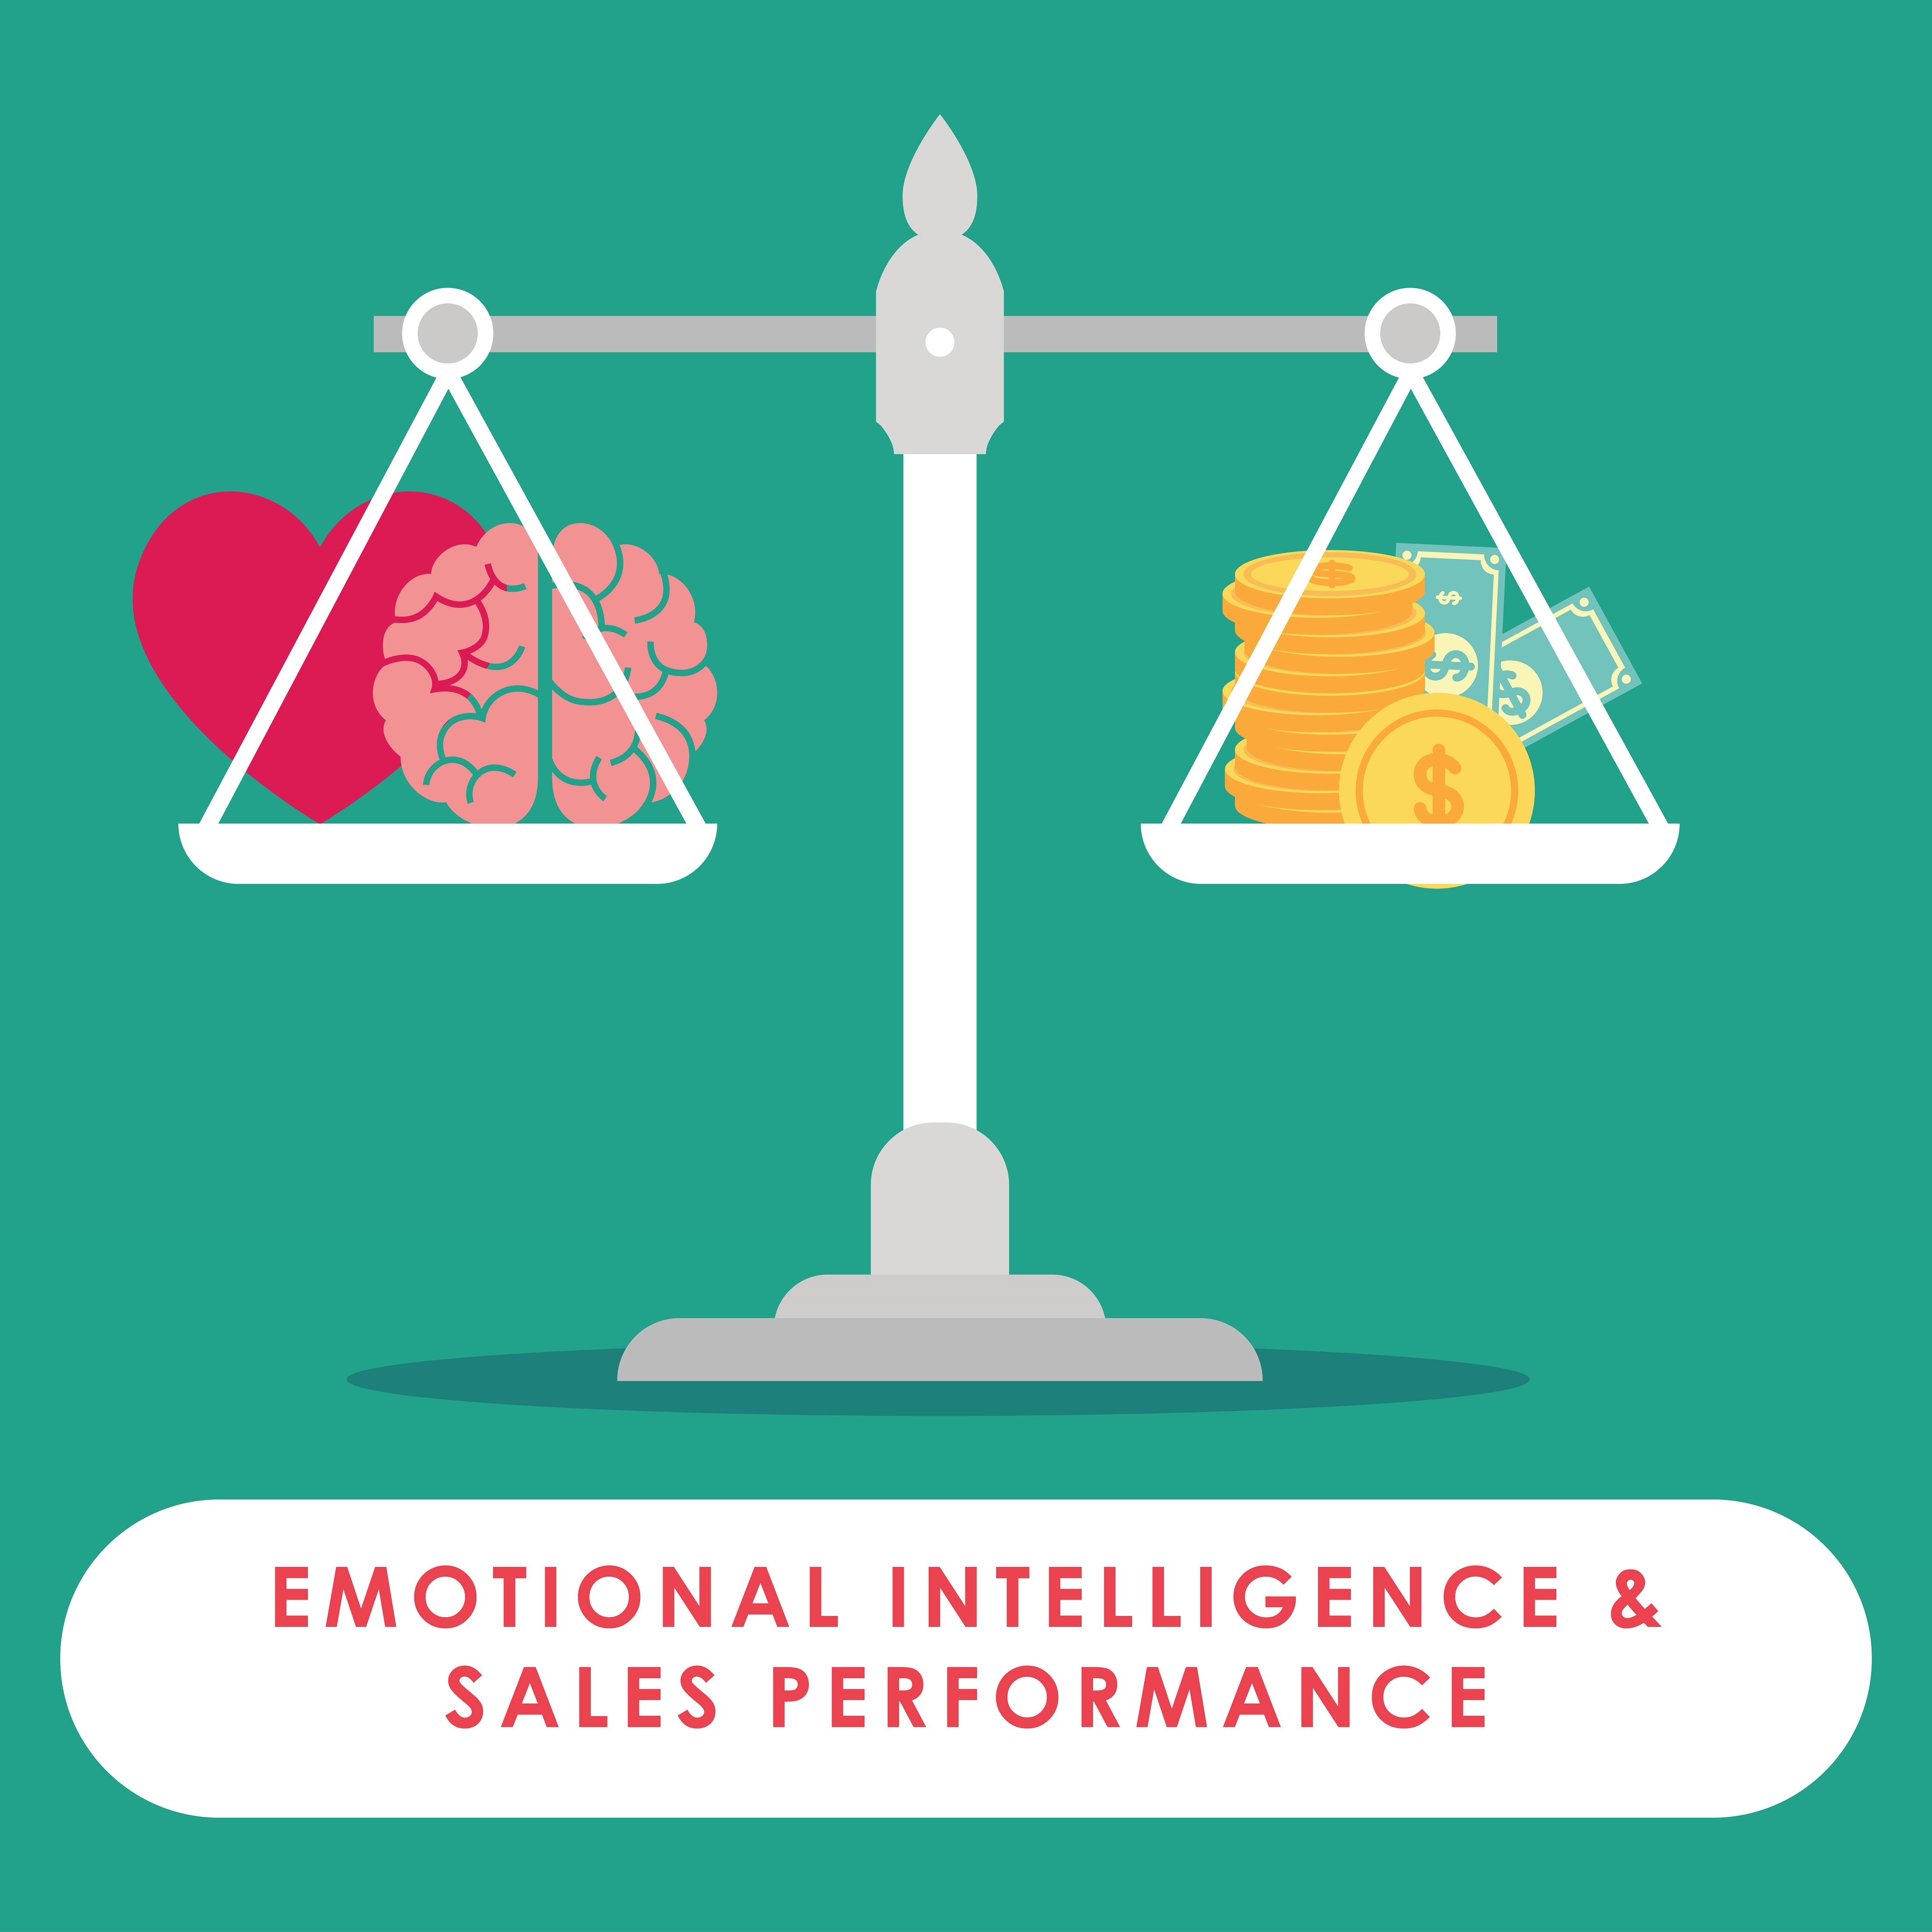 3 REASONS WHY EMOTIONAL INTELLIGENCE IS IMPORTANT FOR A SALES CANDIDATE.